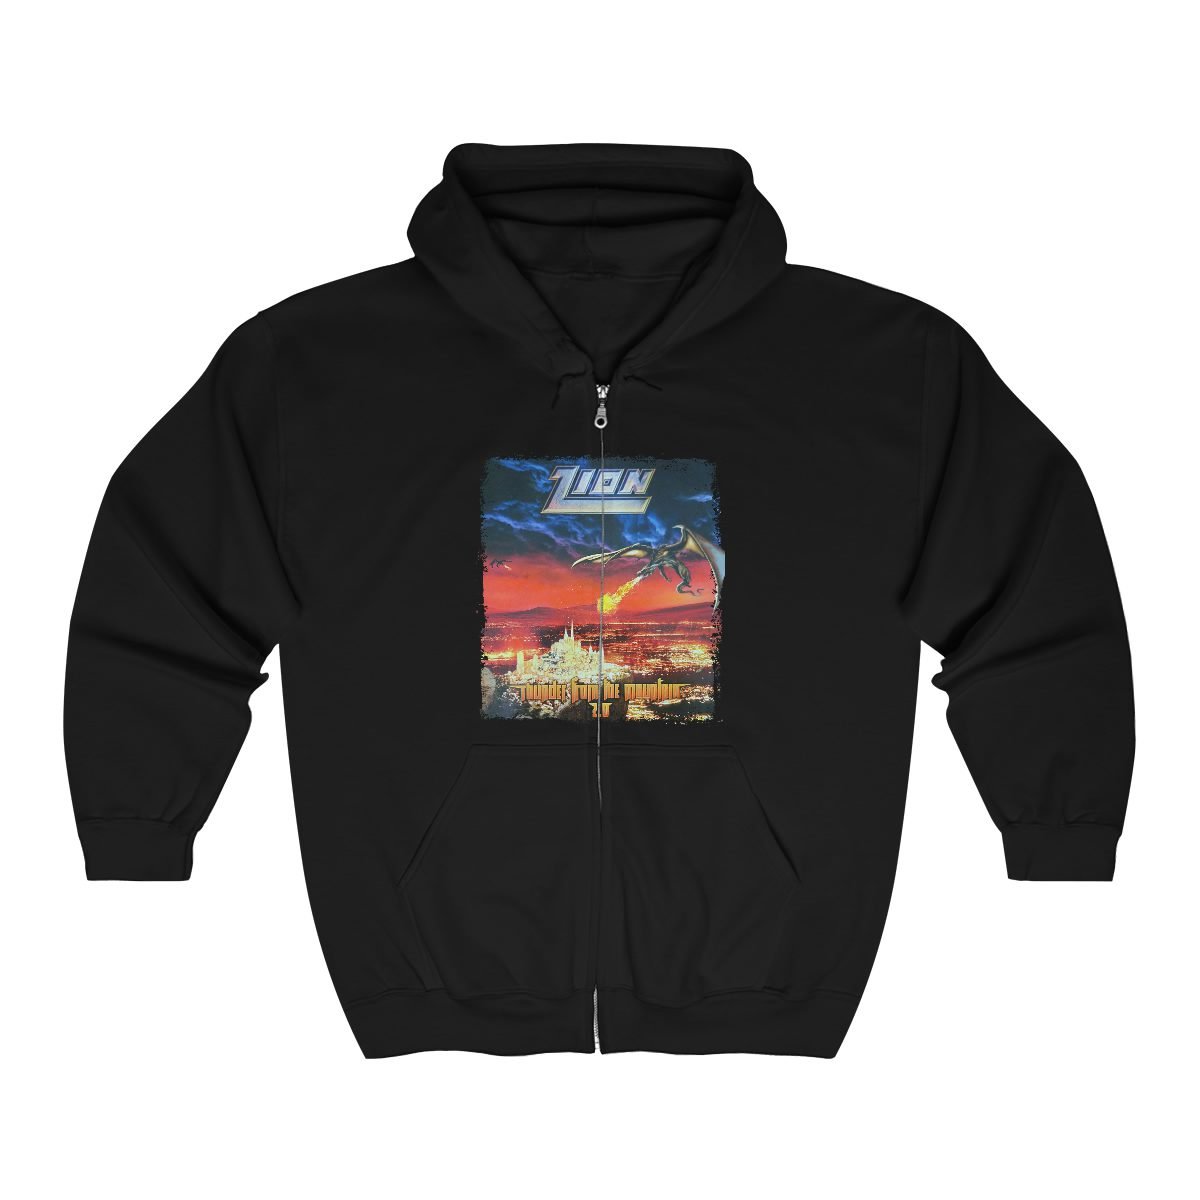 Zion – Thunder From The Mountain 2.0 Full Zip Hooded Sweatshirt